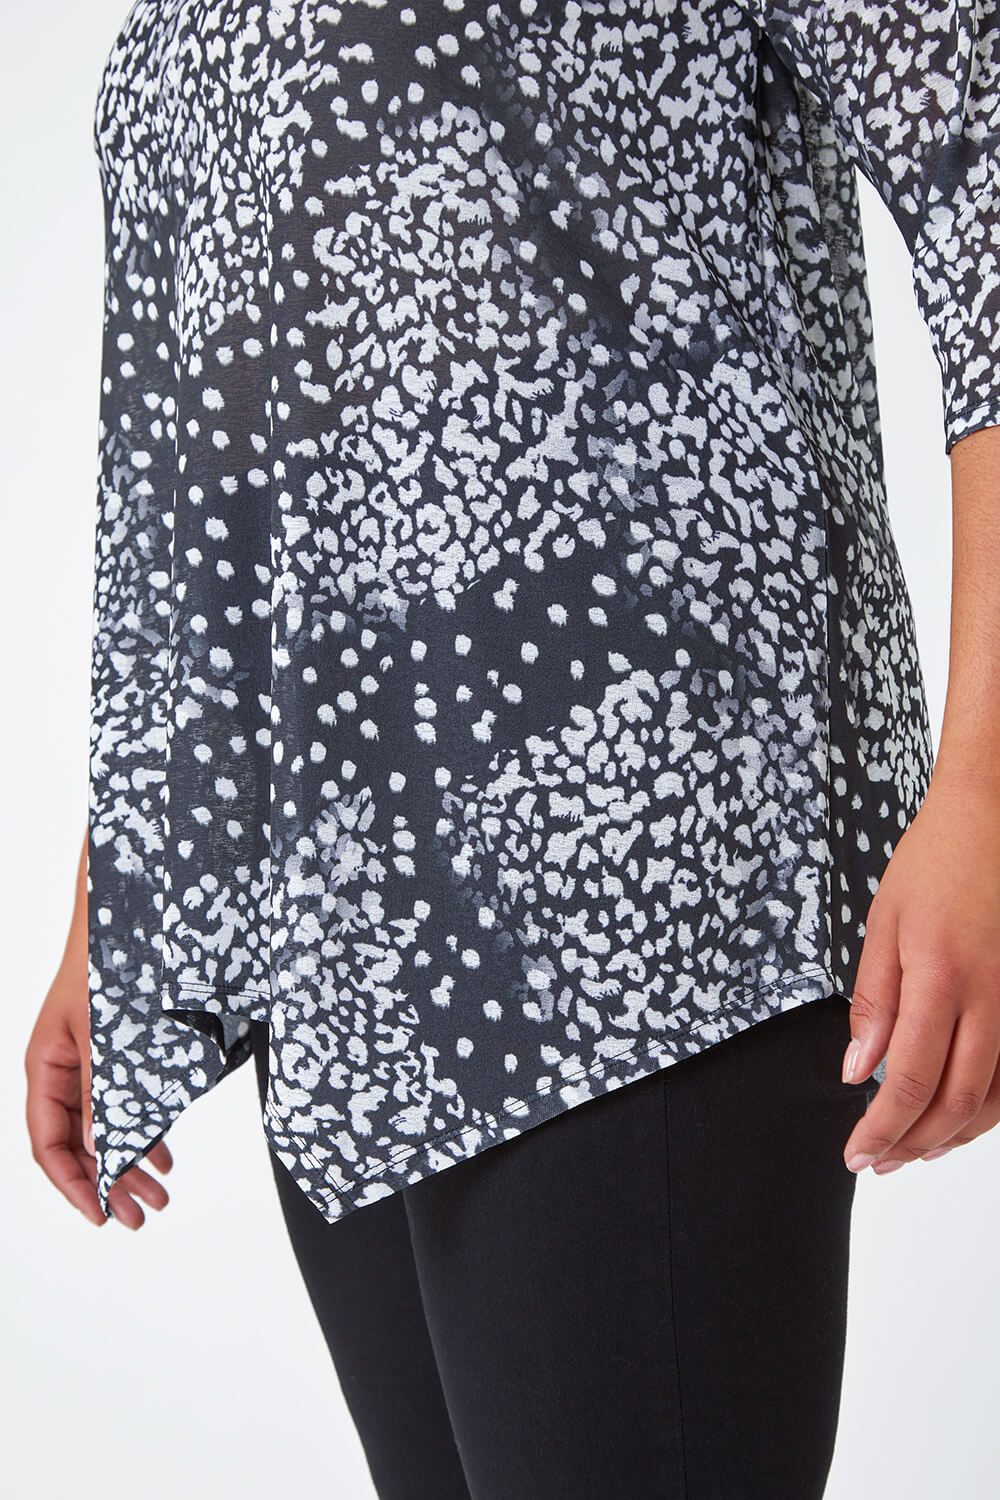 Charcoal Curve Animal Print Tunic Stretch Top , Image 5 of 5